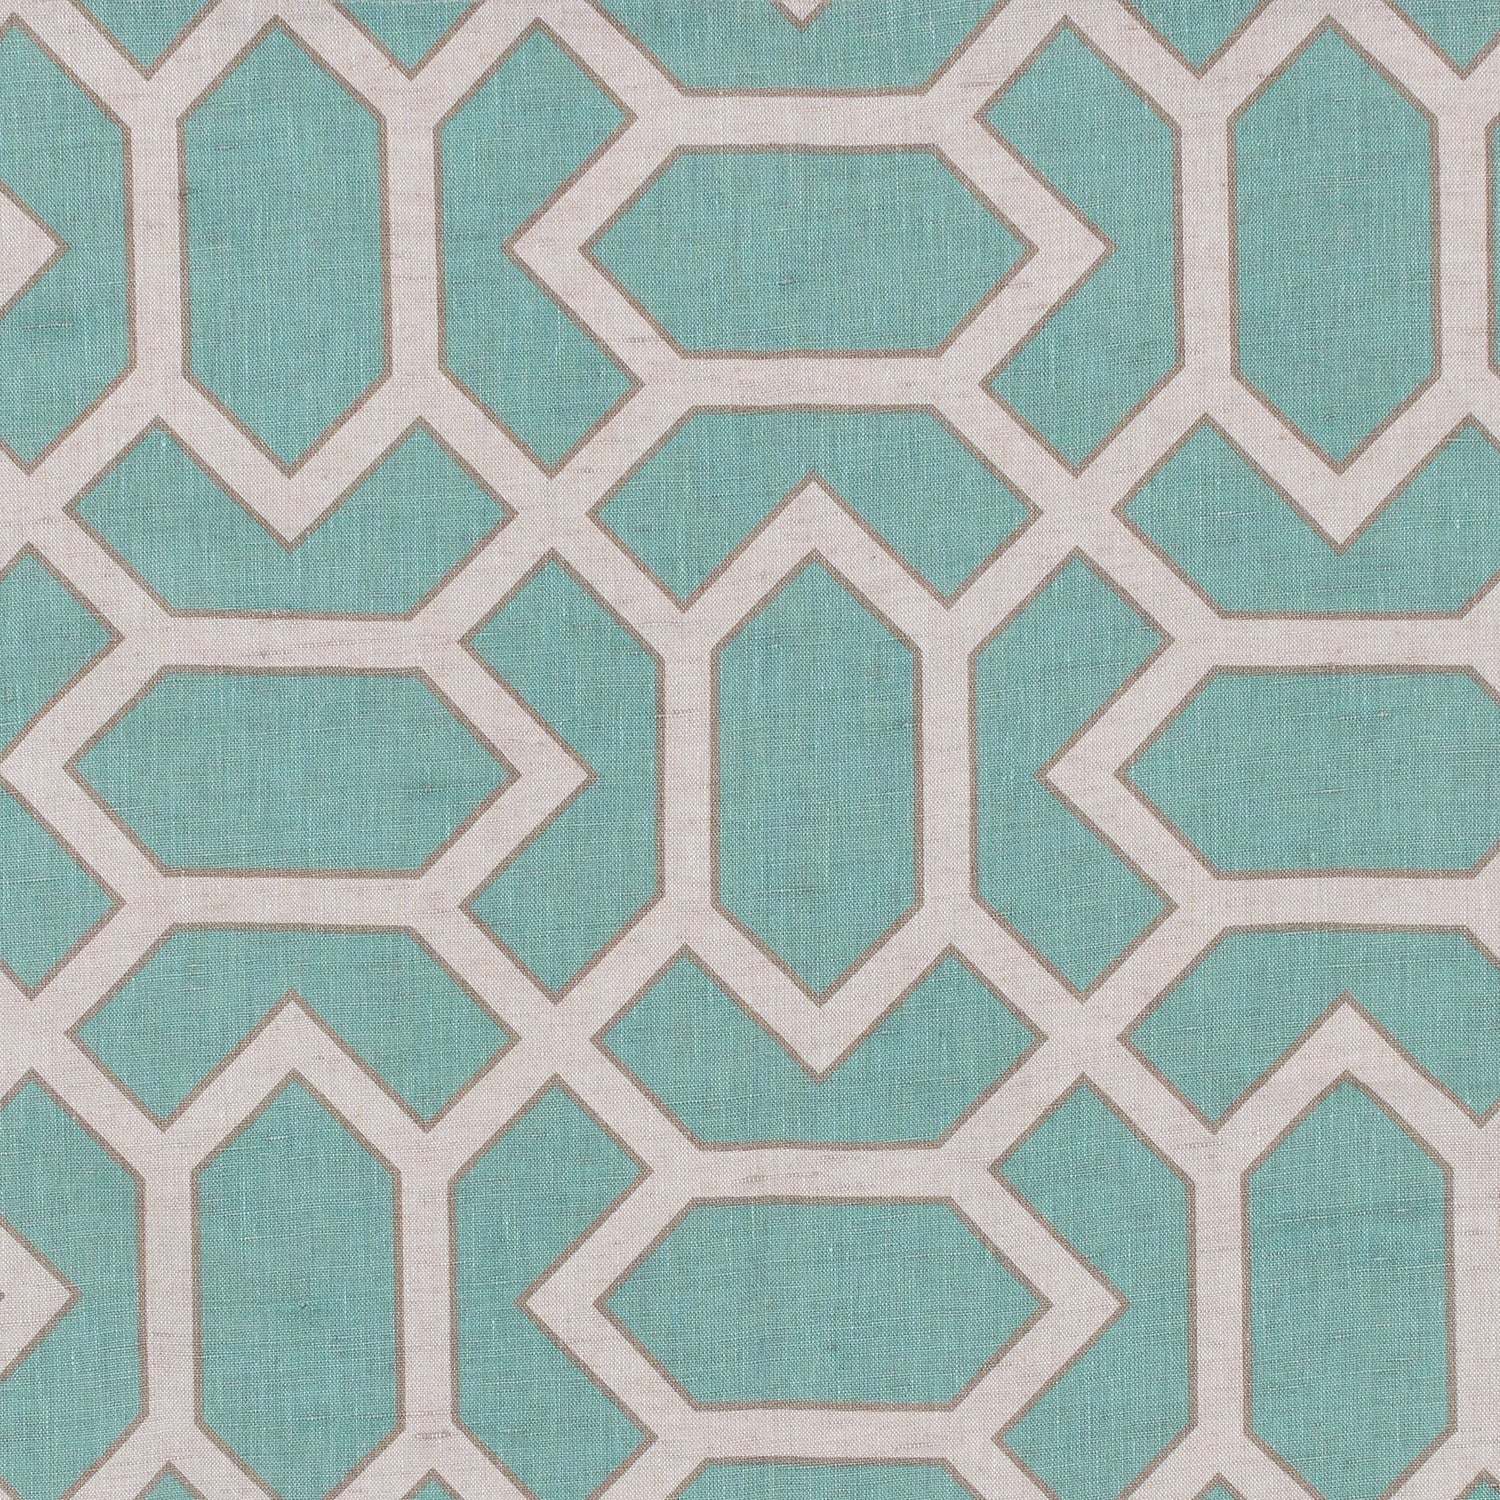 Fabric in a geometric lattice print in cream and gray on a turquoise field.